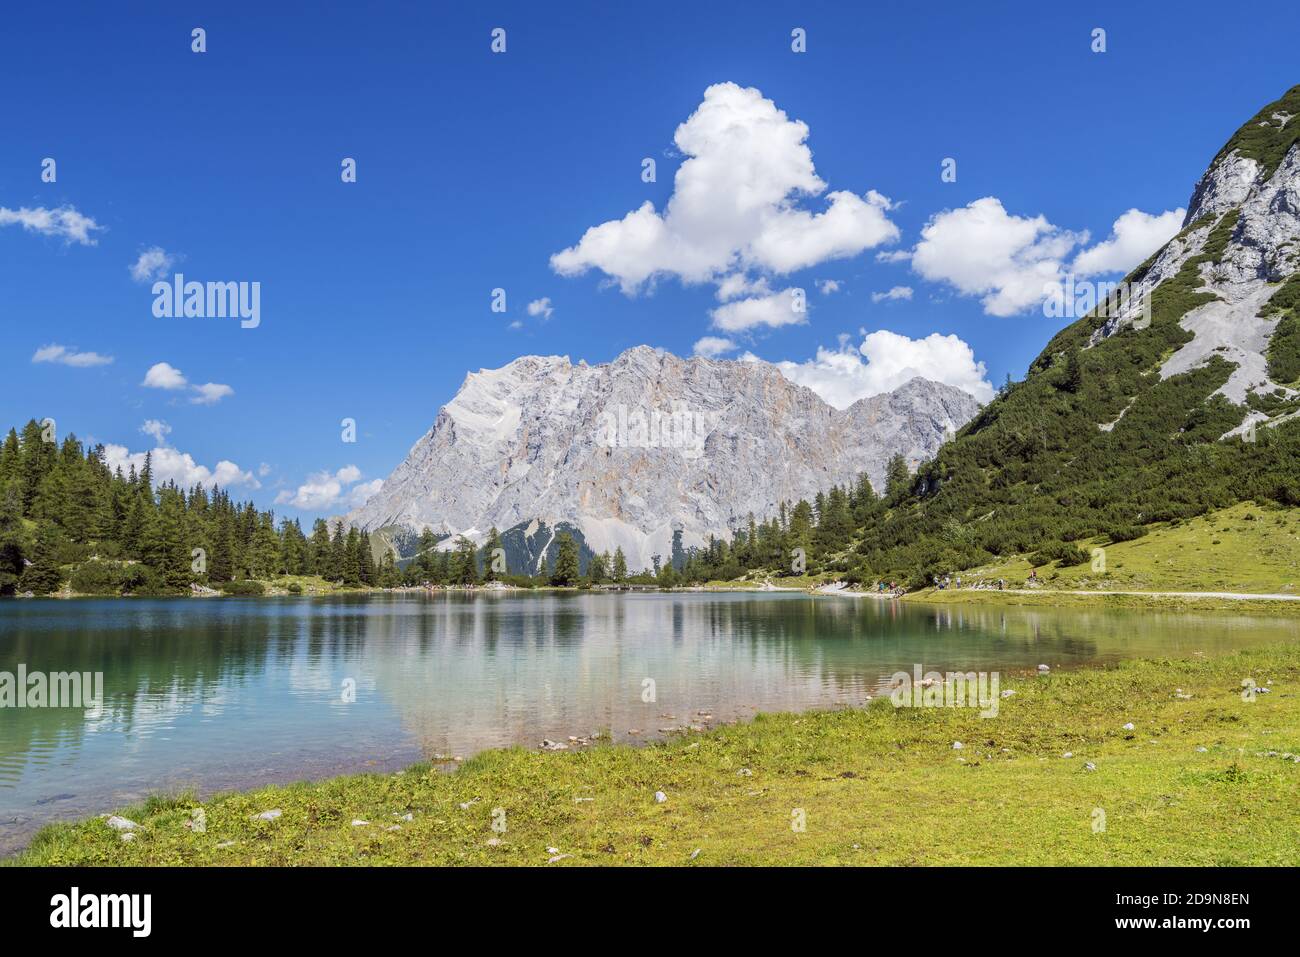 View from Seebensee in the Mieminger chain to Zugspitze (2,962 m) in the Wetterstein Mountains, Ehrwald, Tyrol, Austria Stock Photo